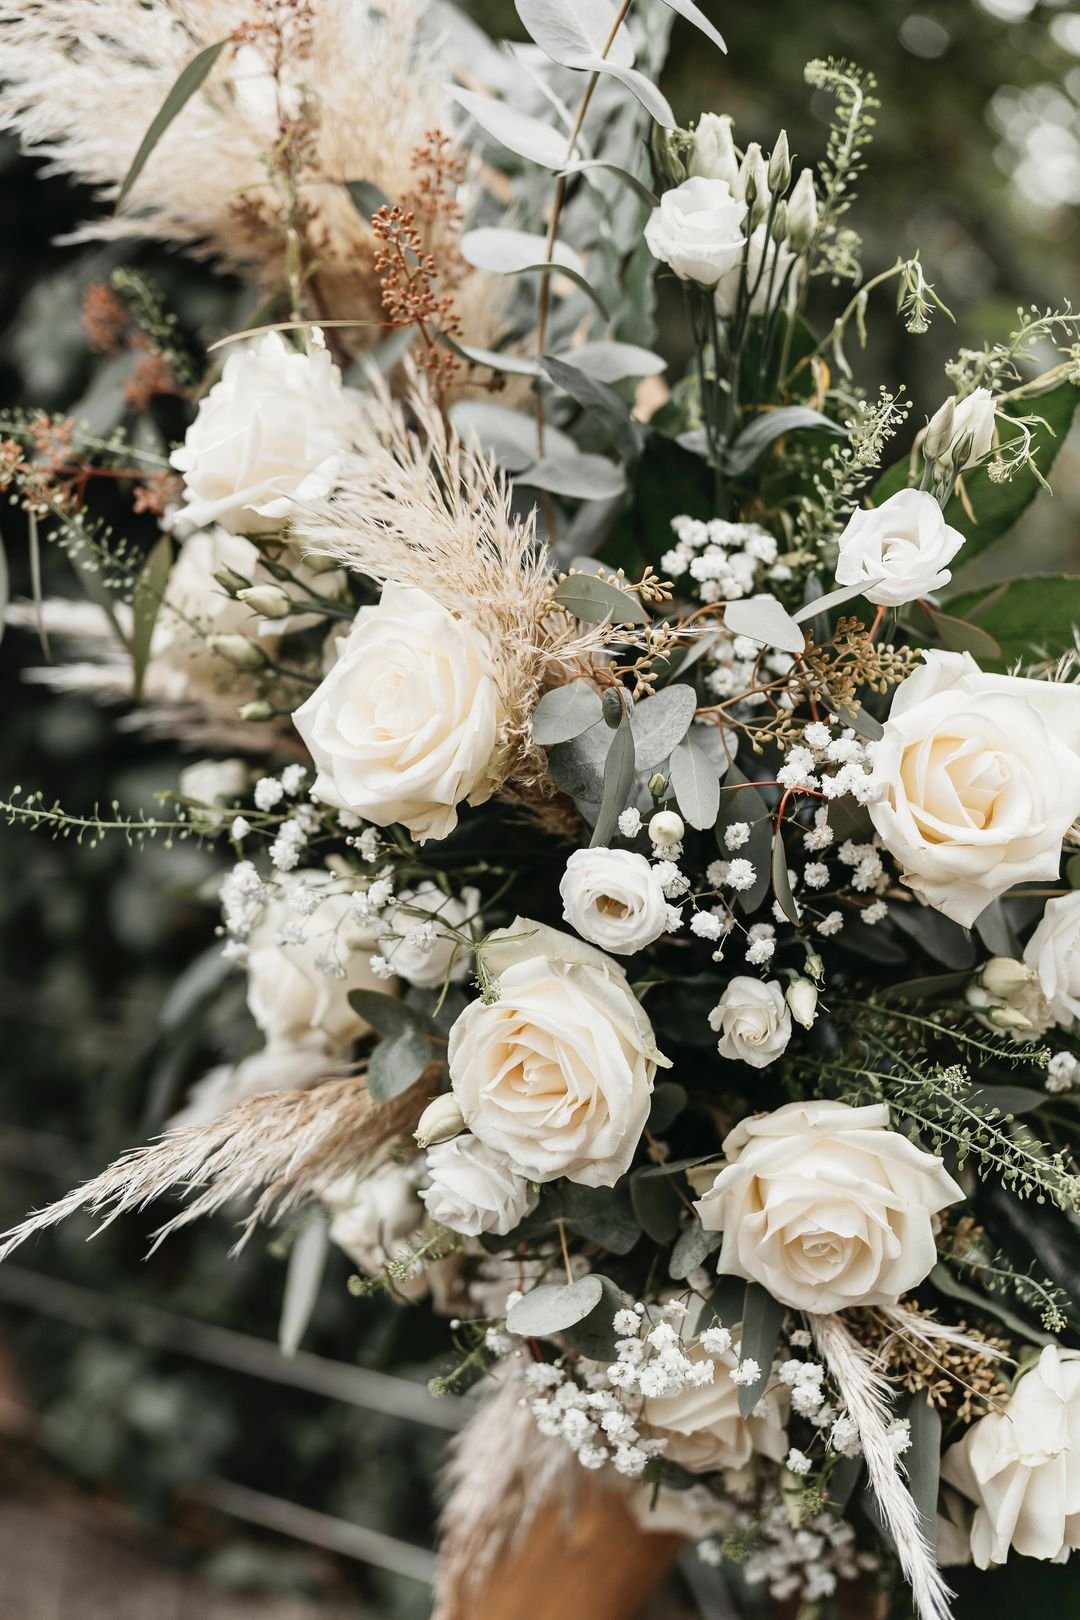 Flowers for a Winter Bridal Bouquet | Mill Pond Estate